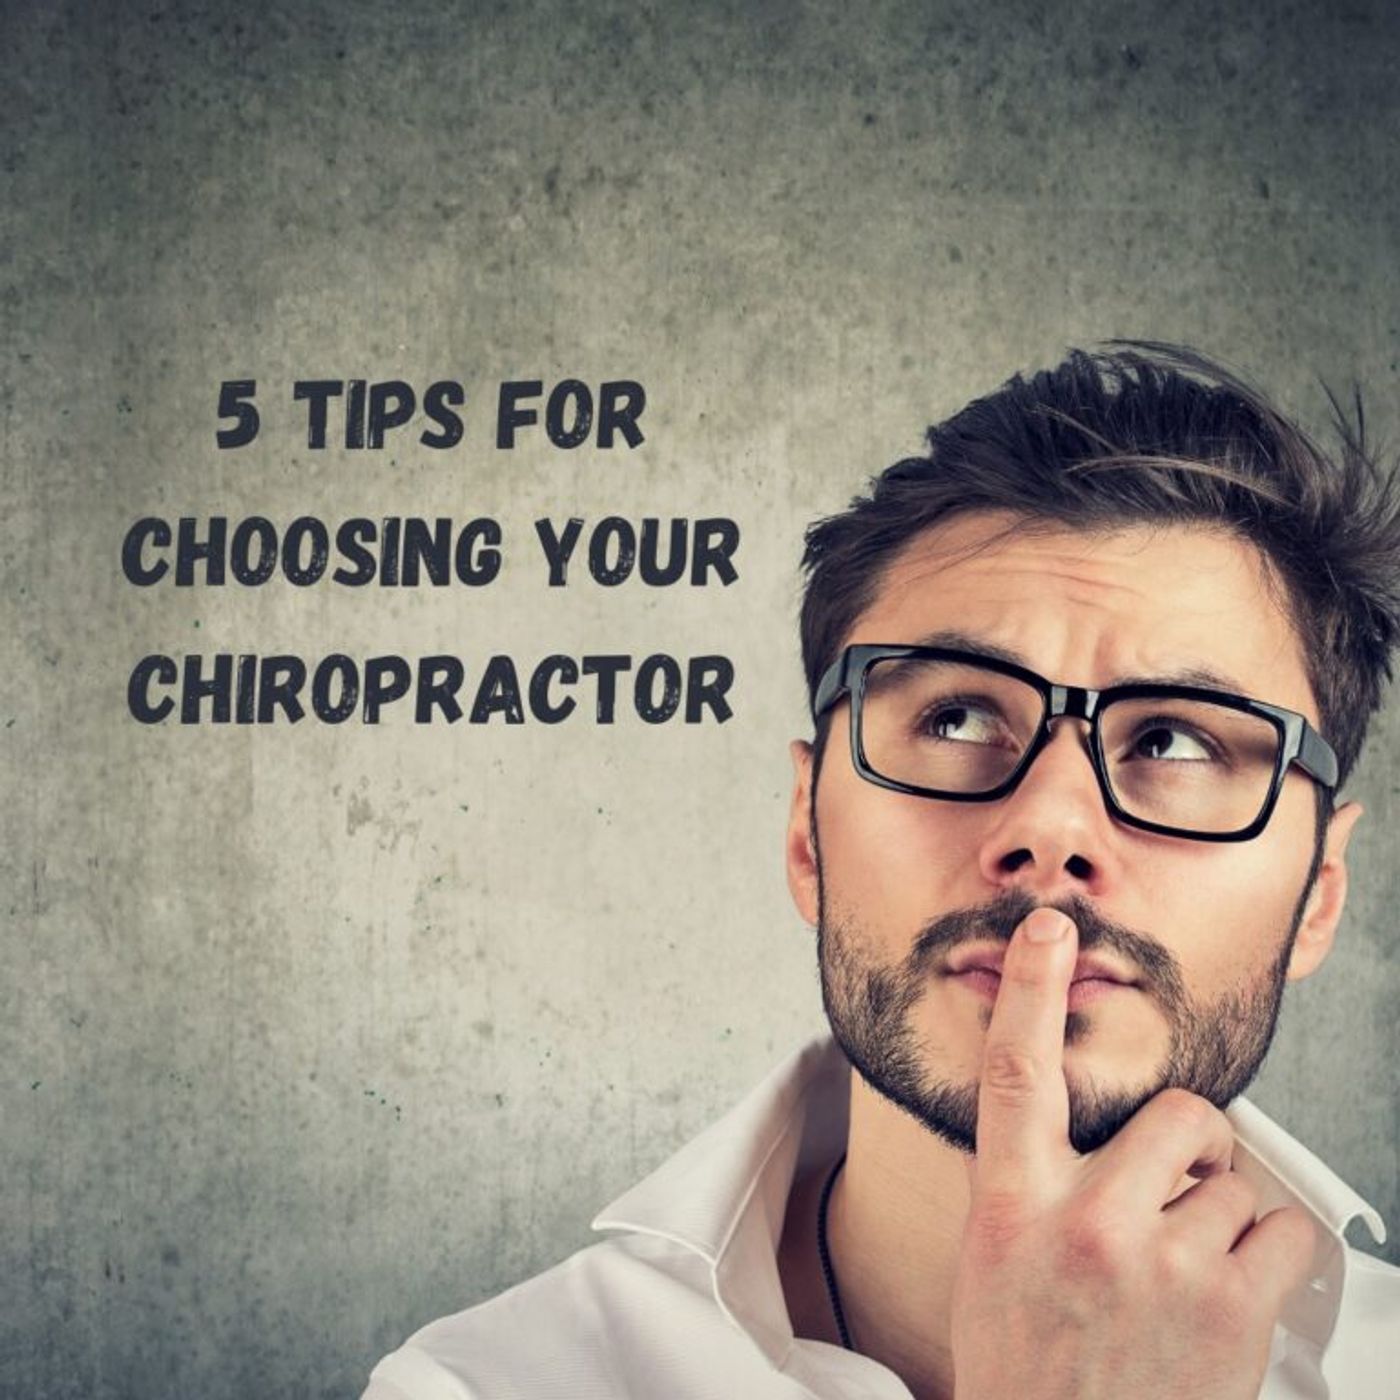 5 Tips for Choosing Your Chiropractor